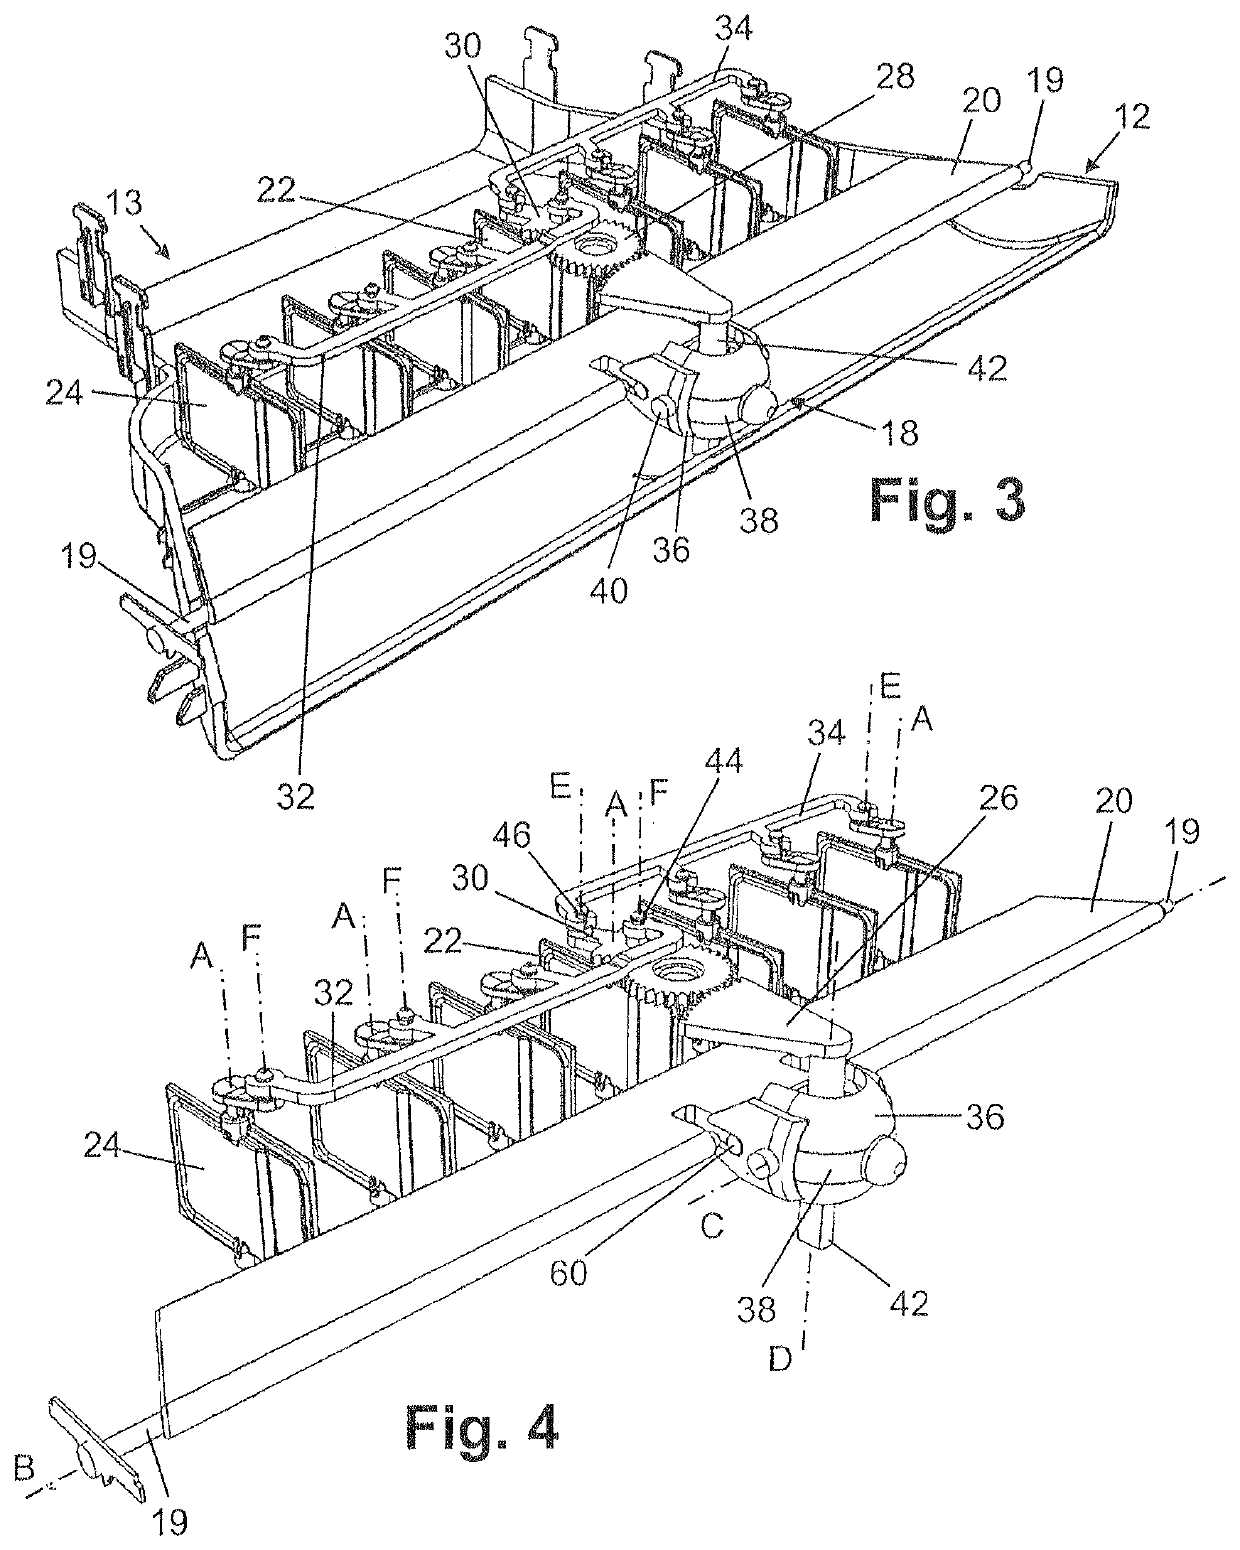 Air vent having a control device